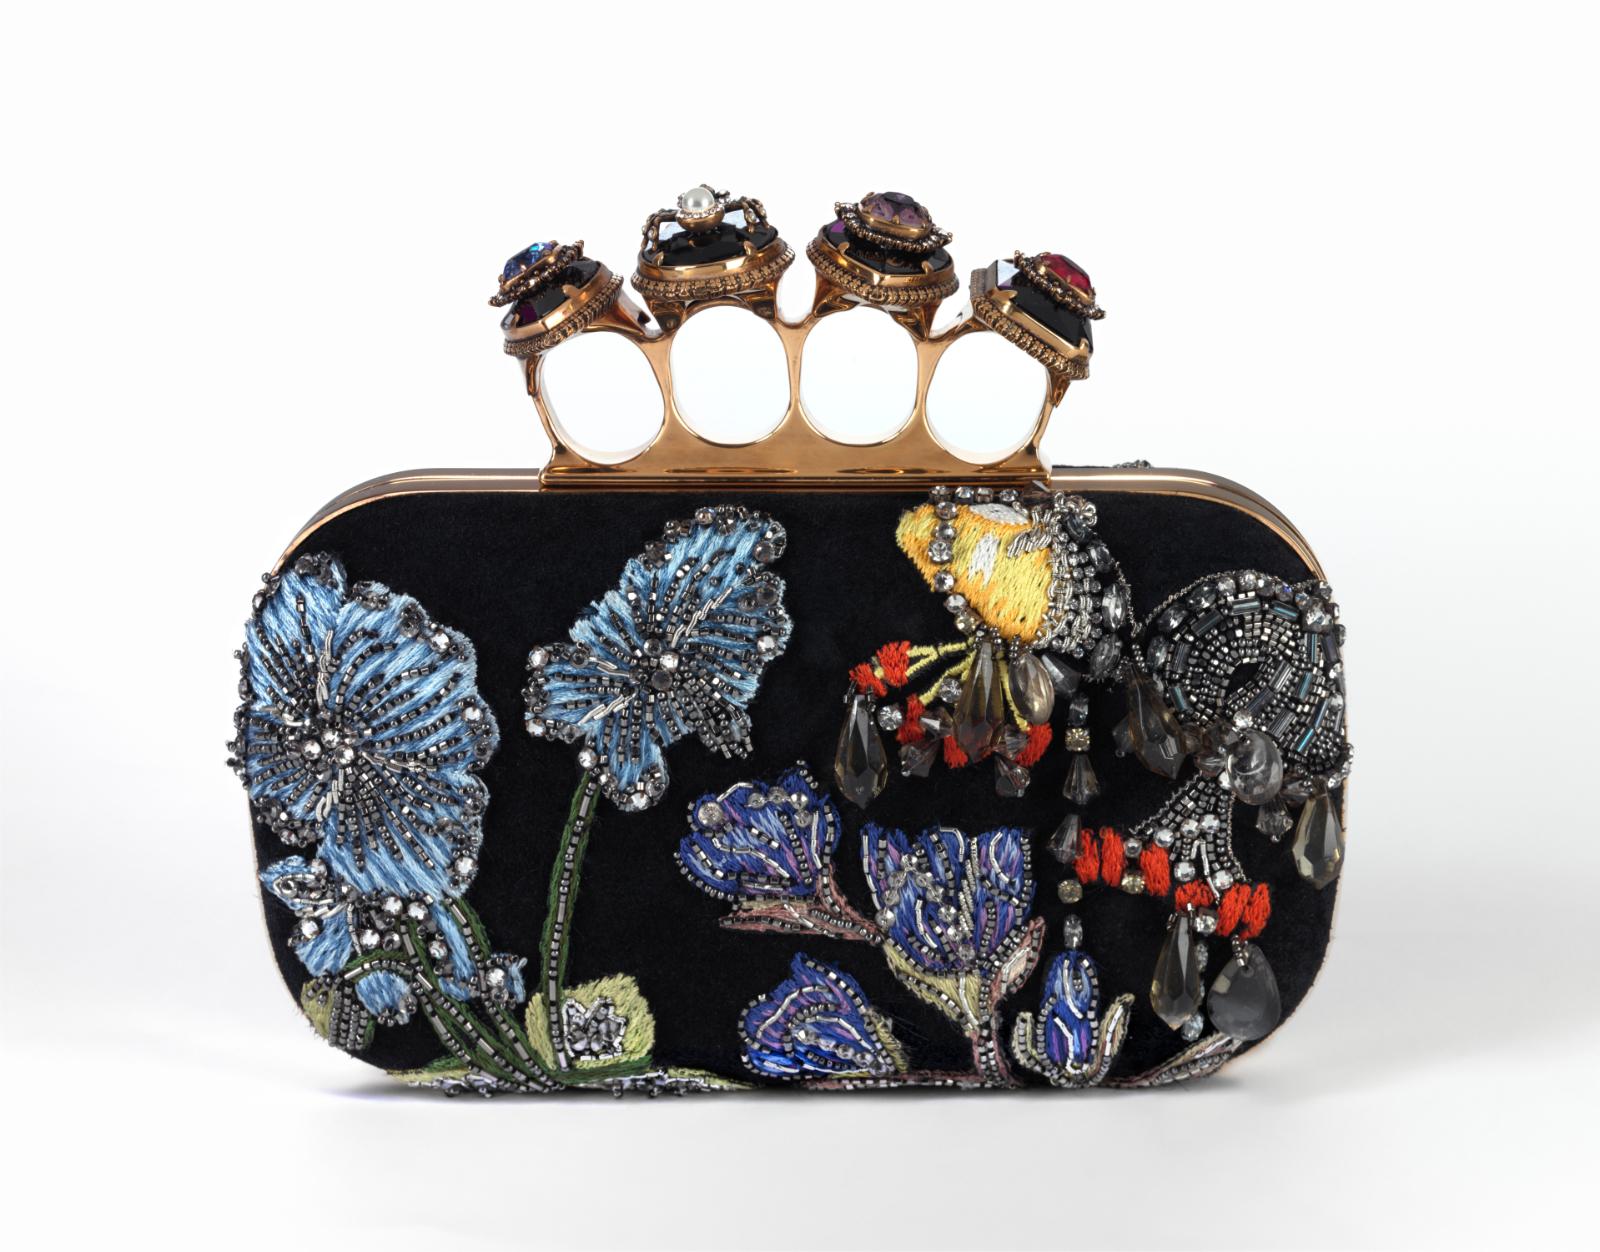 The V&A Museum Unpacks Our Obsession with Handbags - 1stDibs Introspective